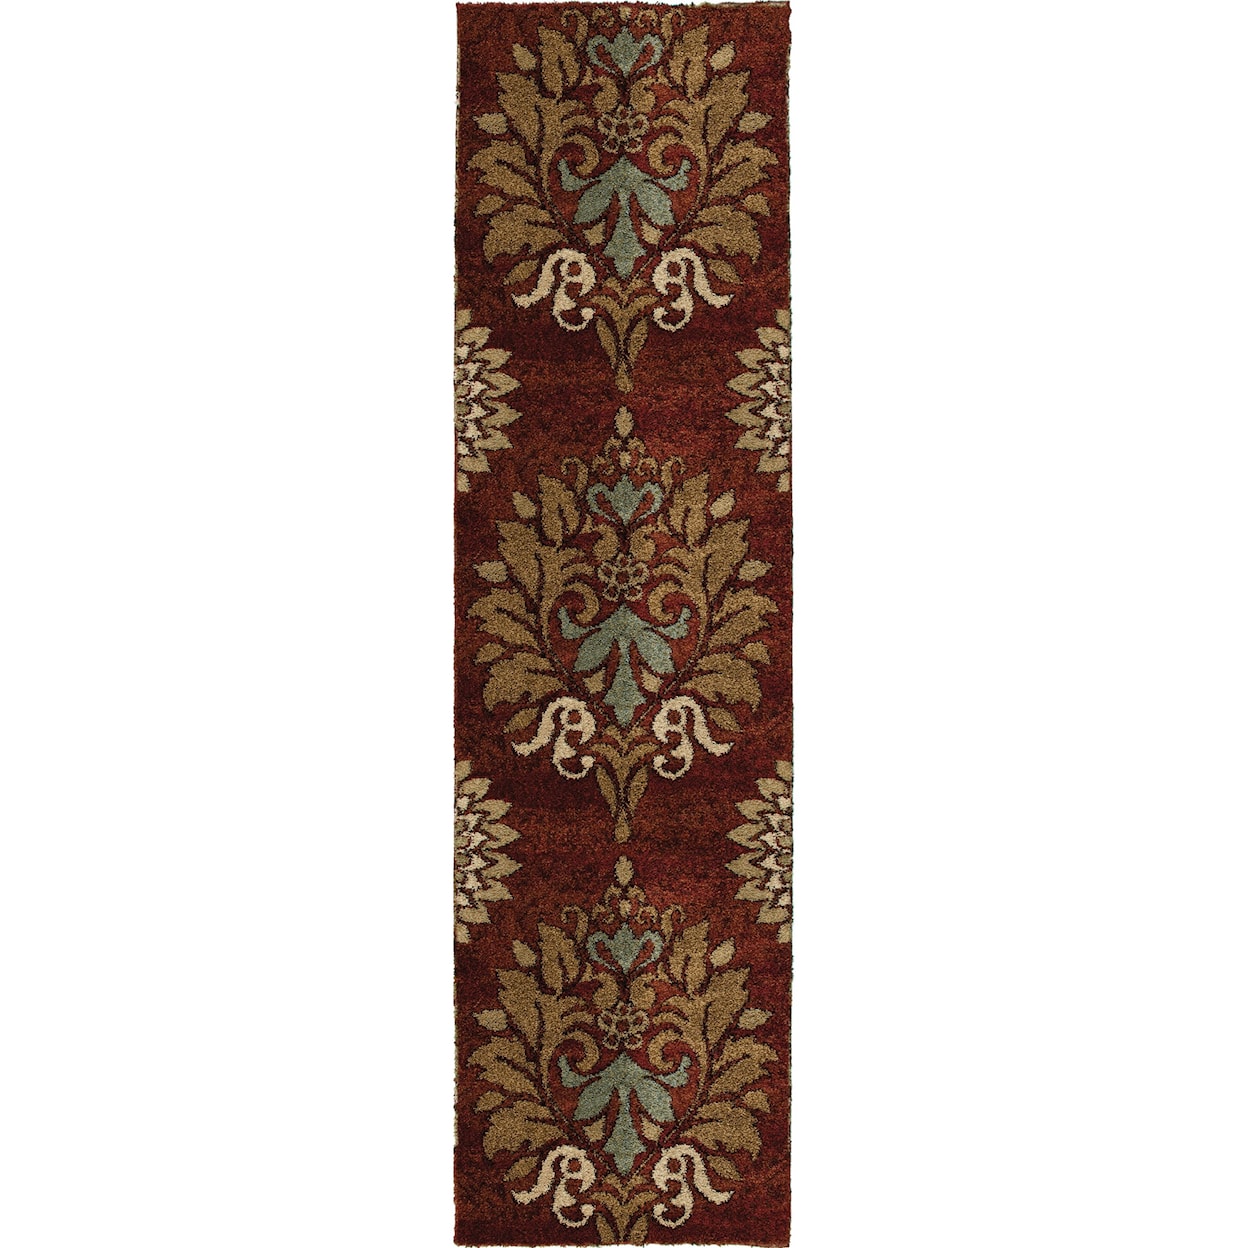 Orian Rugs Wild Weave Jacqueline Rouge 2'3" x 8' Rug